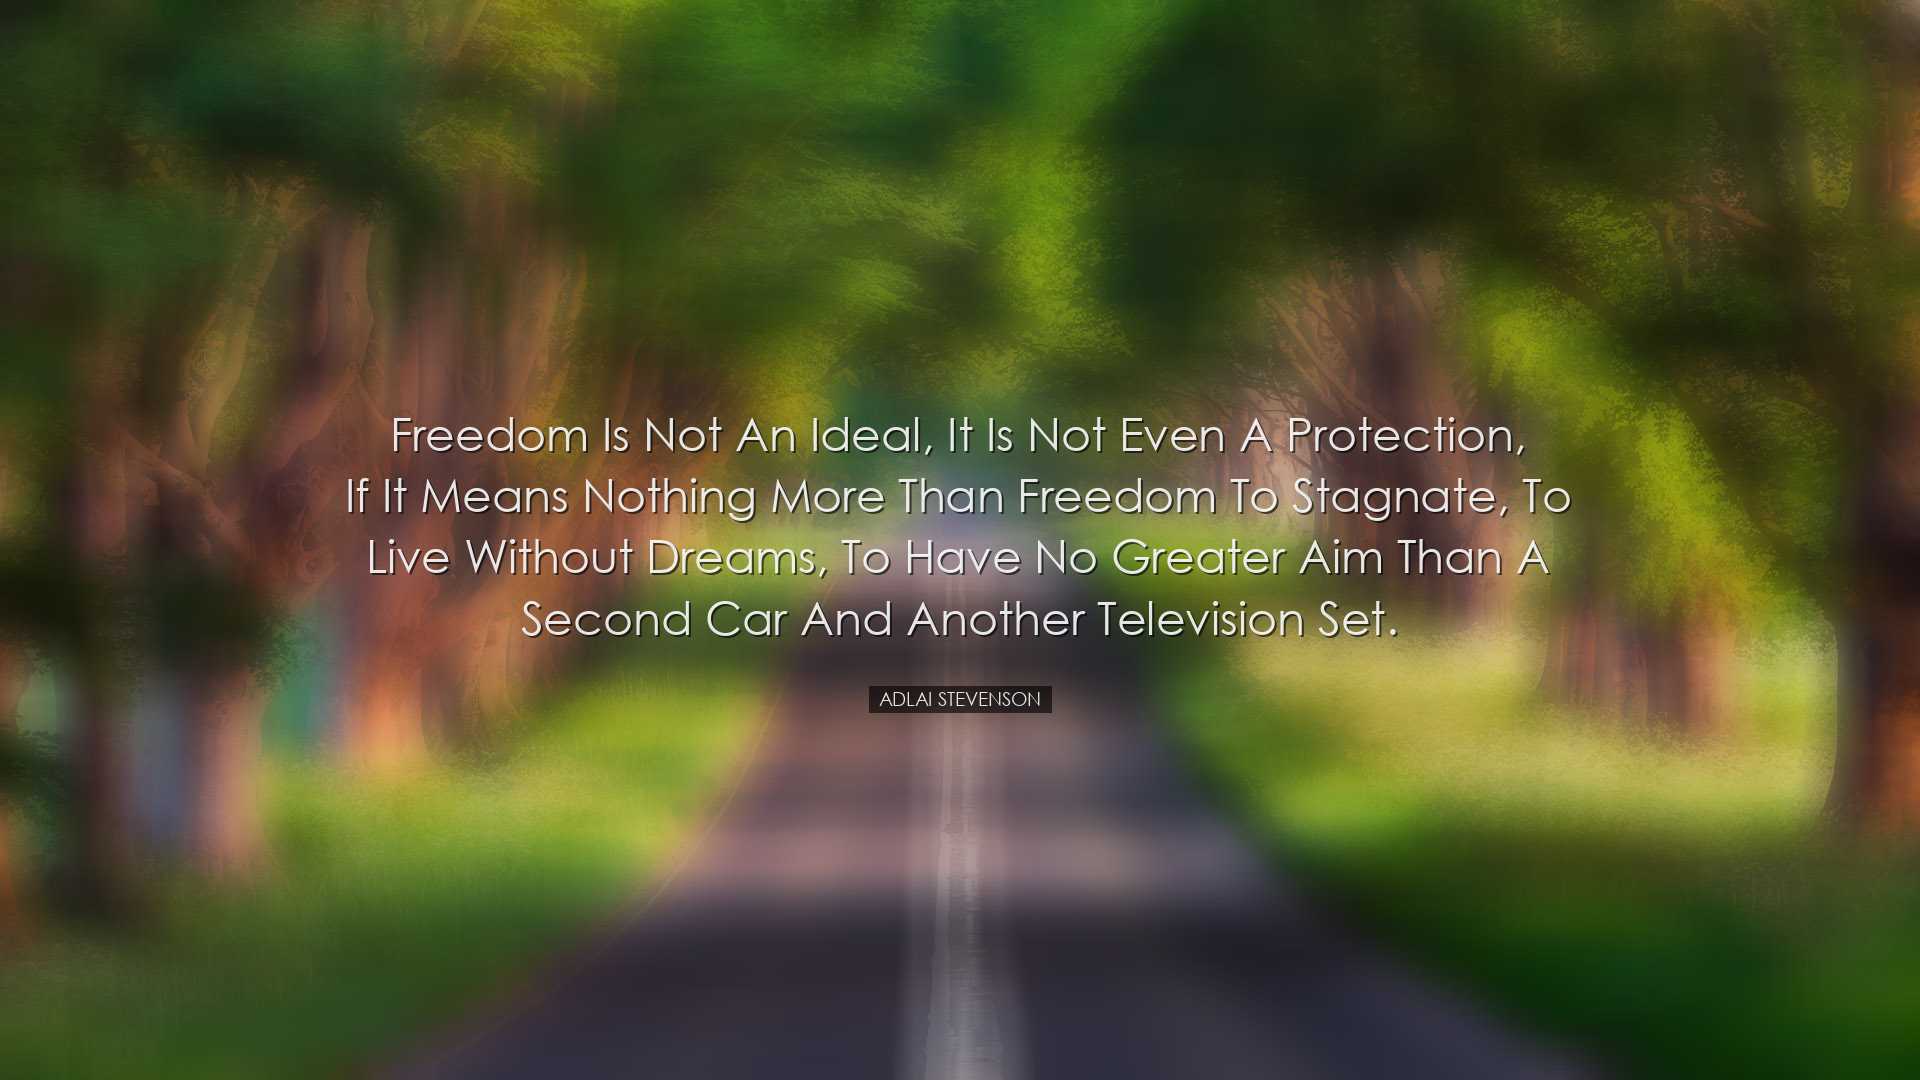 Freedom is not an ideal, it is not even a protection, if it means